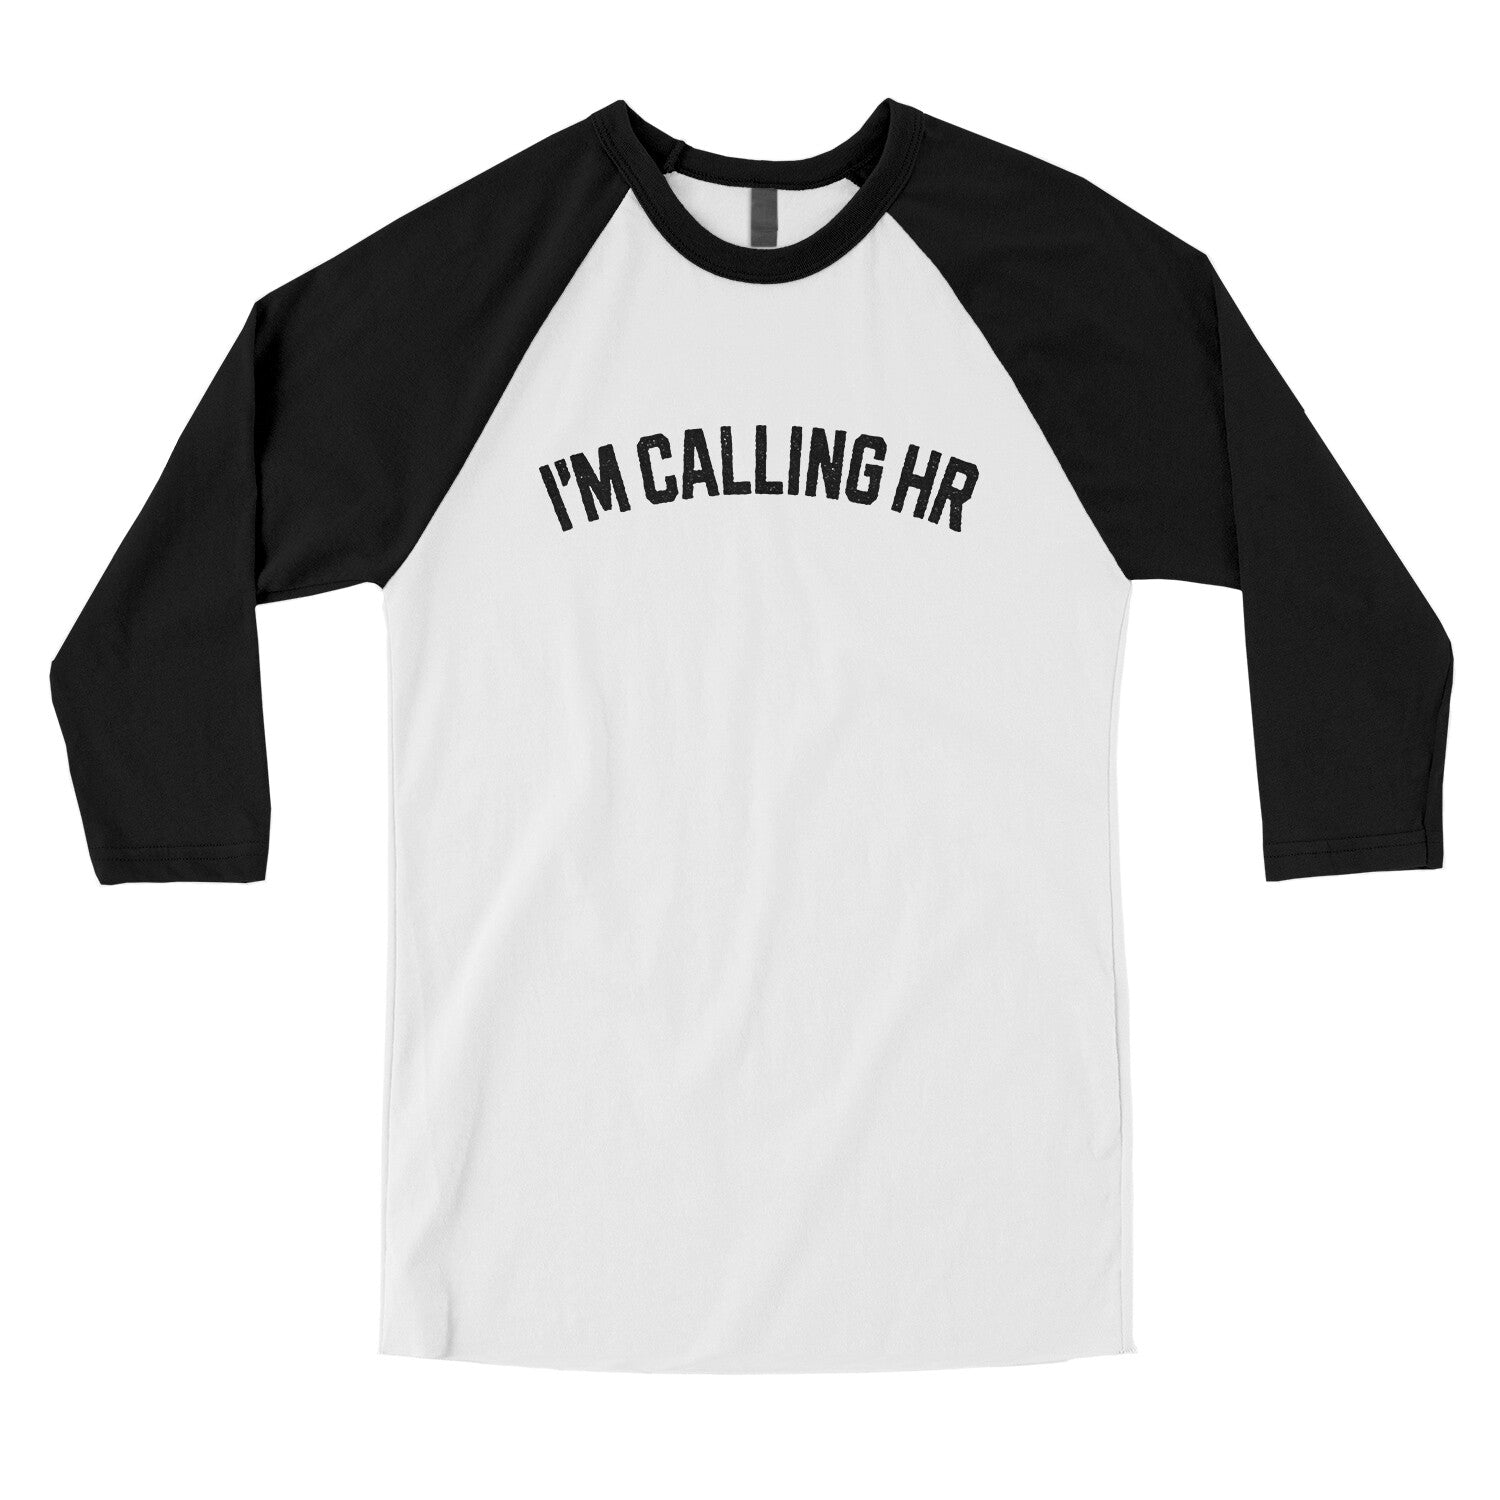 I'm Calling HR in White with Black Color